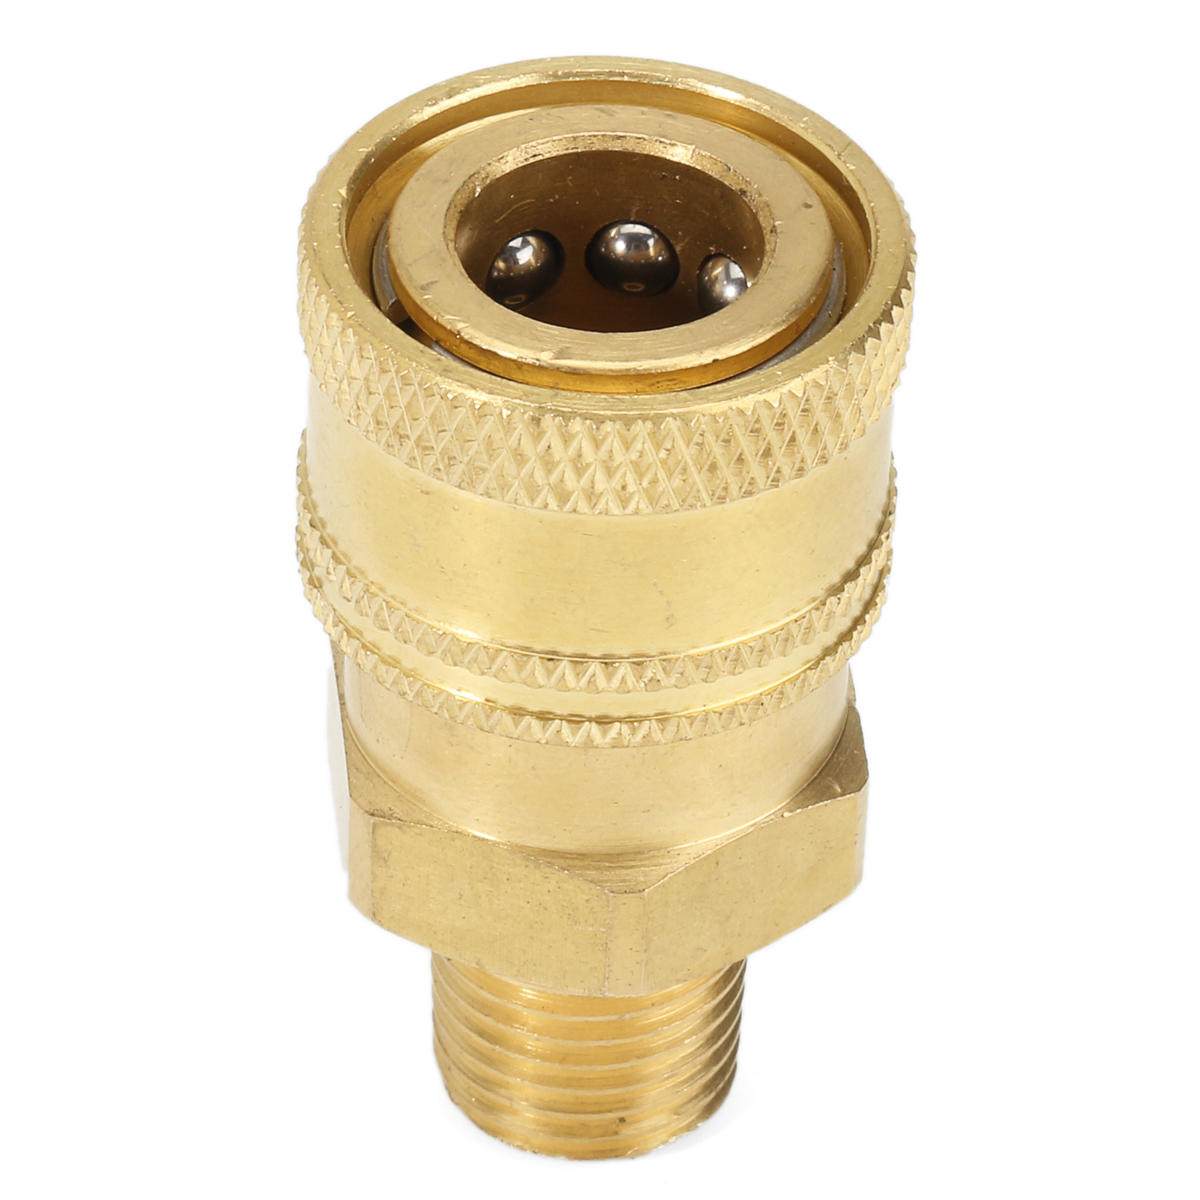 

1/4 Inch Male NPT Quick Coupler Socket Brass Pressure Washer Coupling 4000PSI